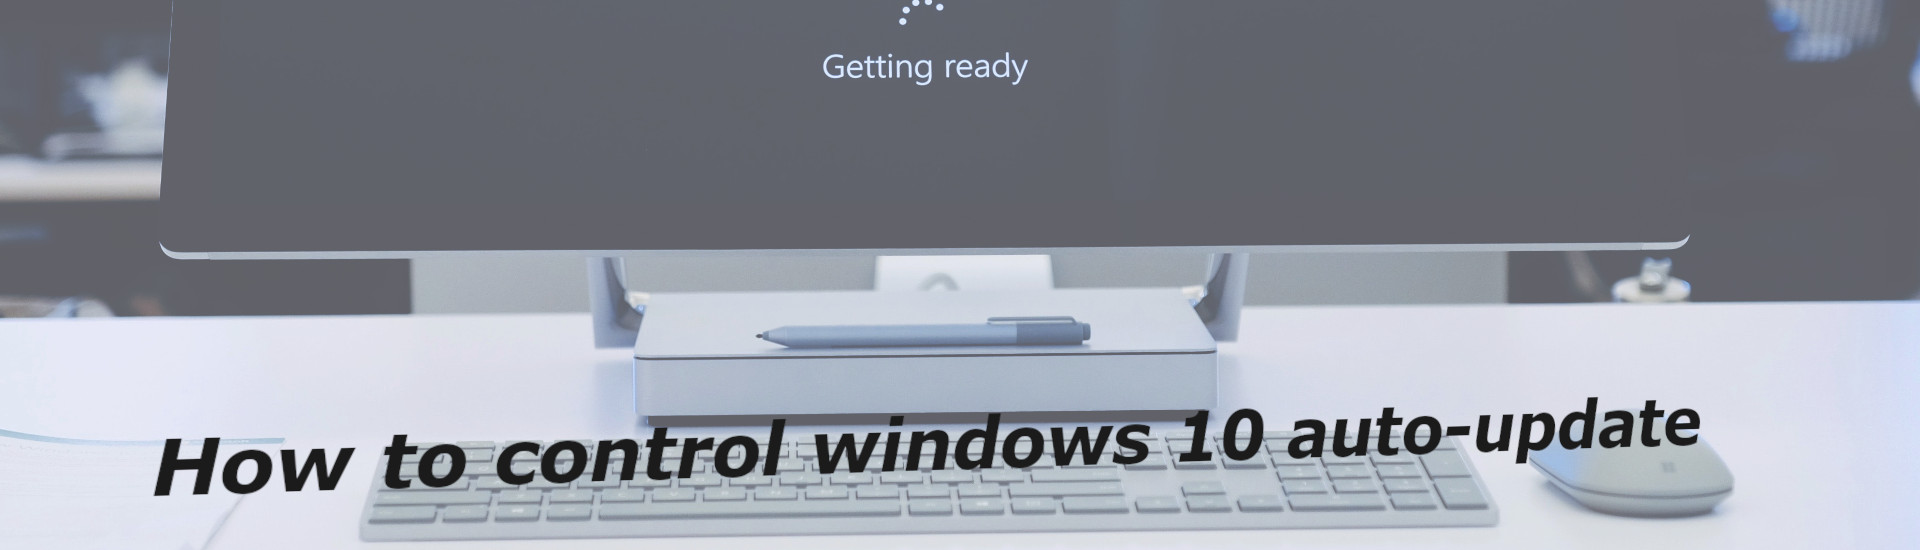 How to control windows 10 auto-update